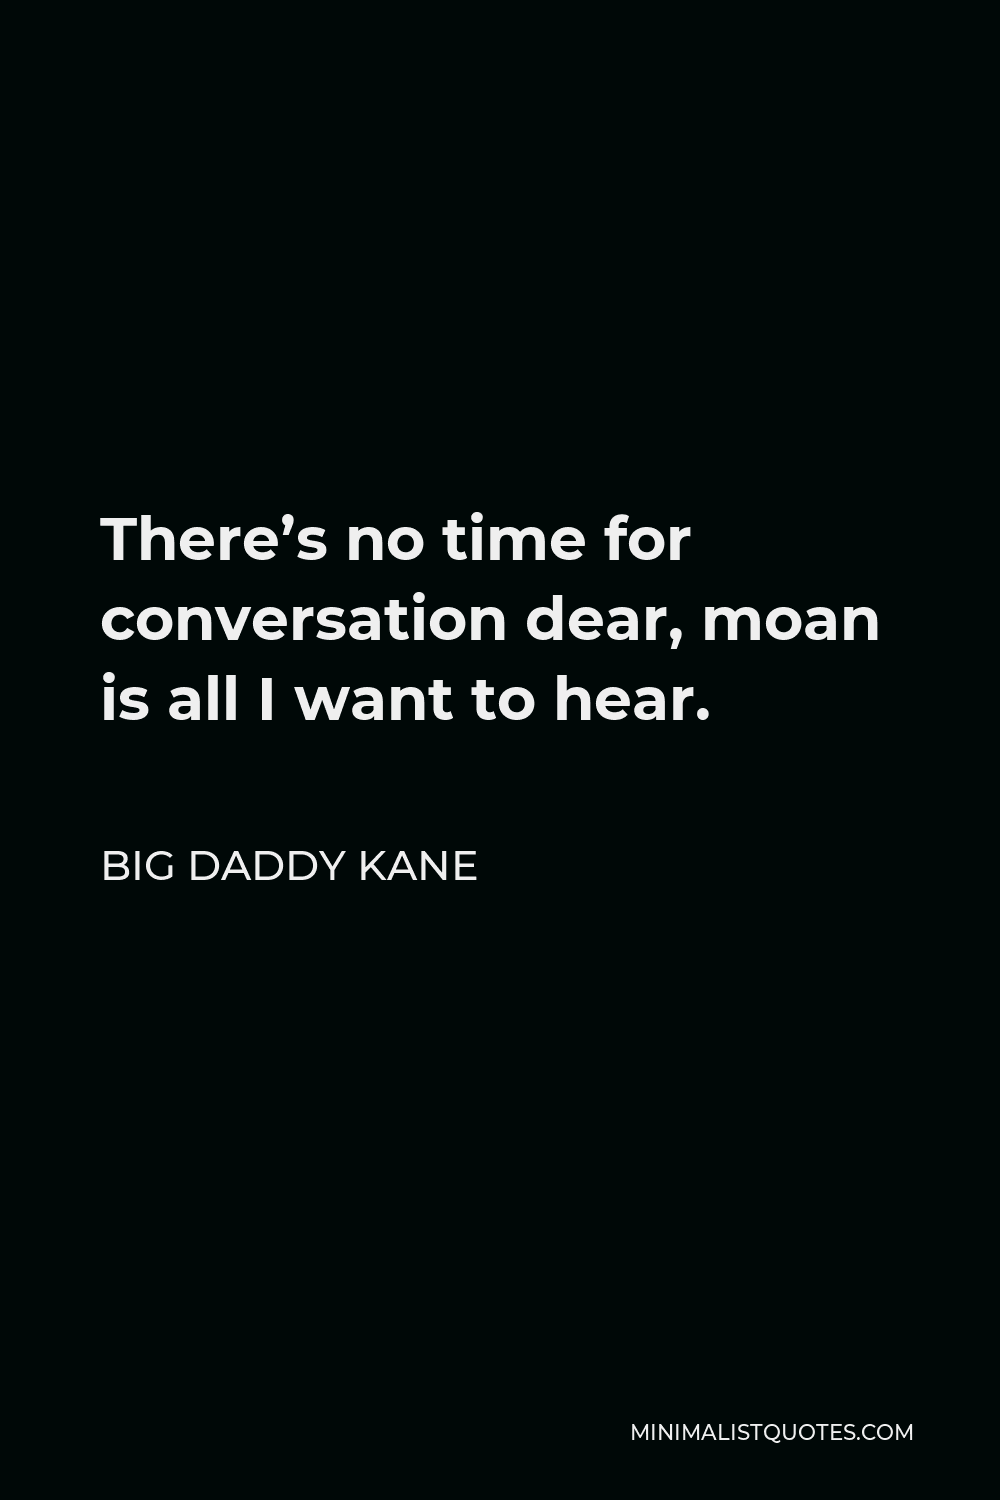 Big Daddy Kane Quote - There’s no time for conversation dear, moan is all I want to hear.